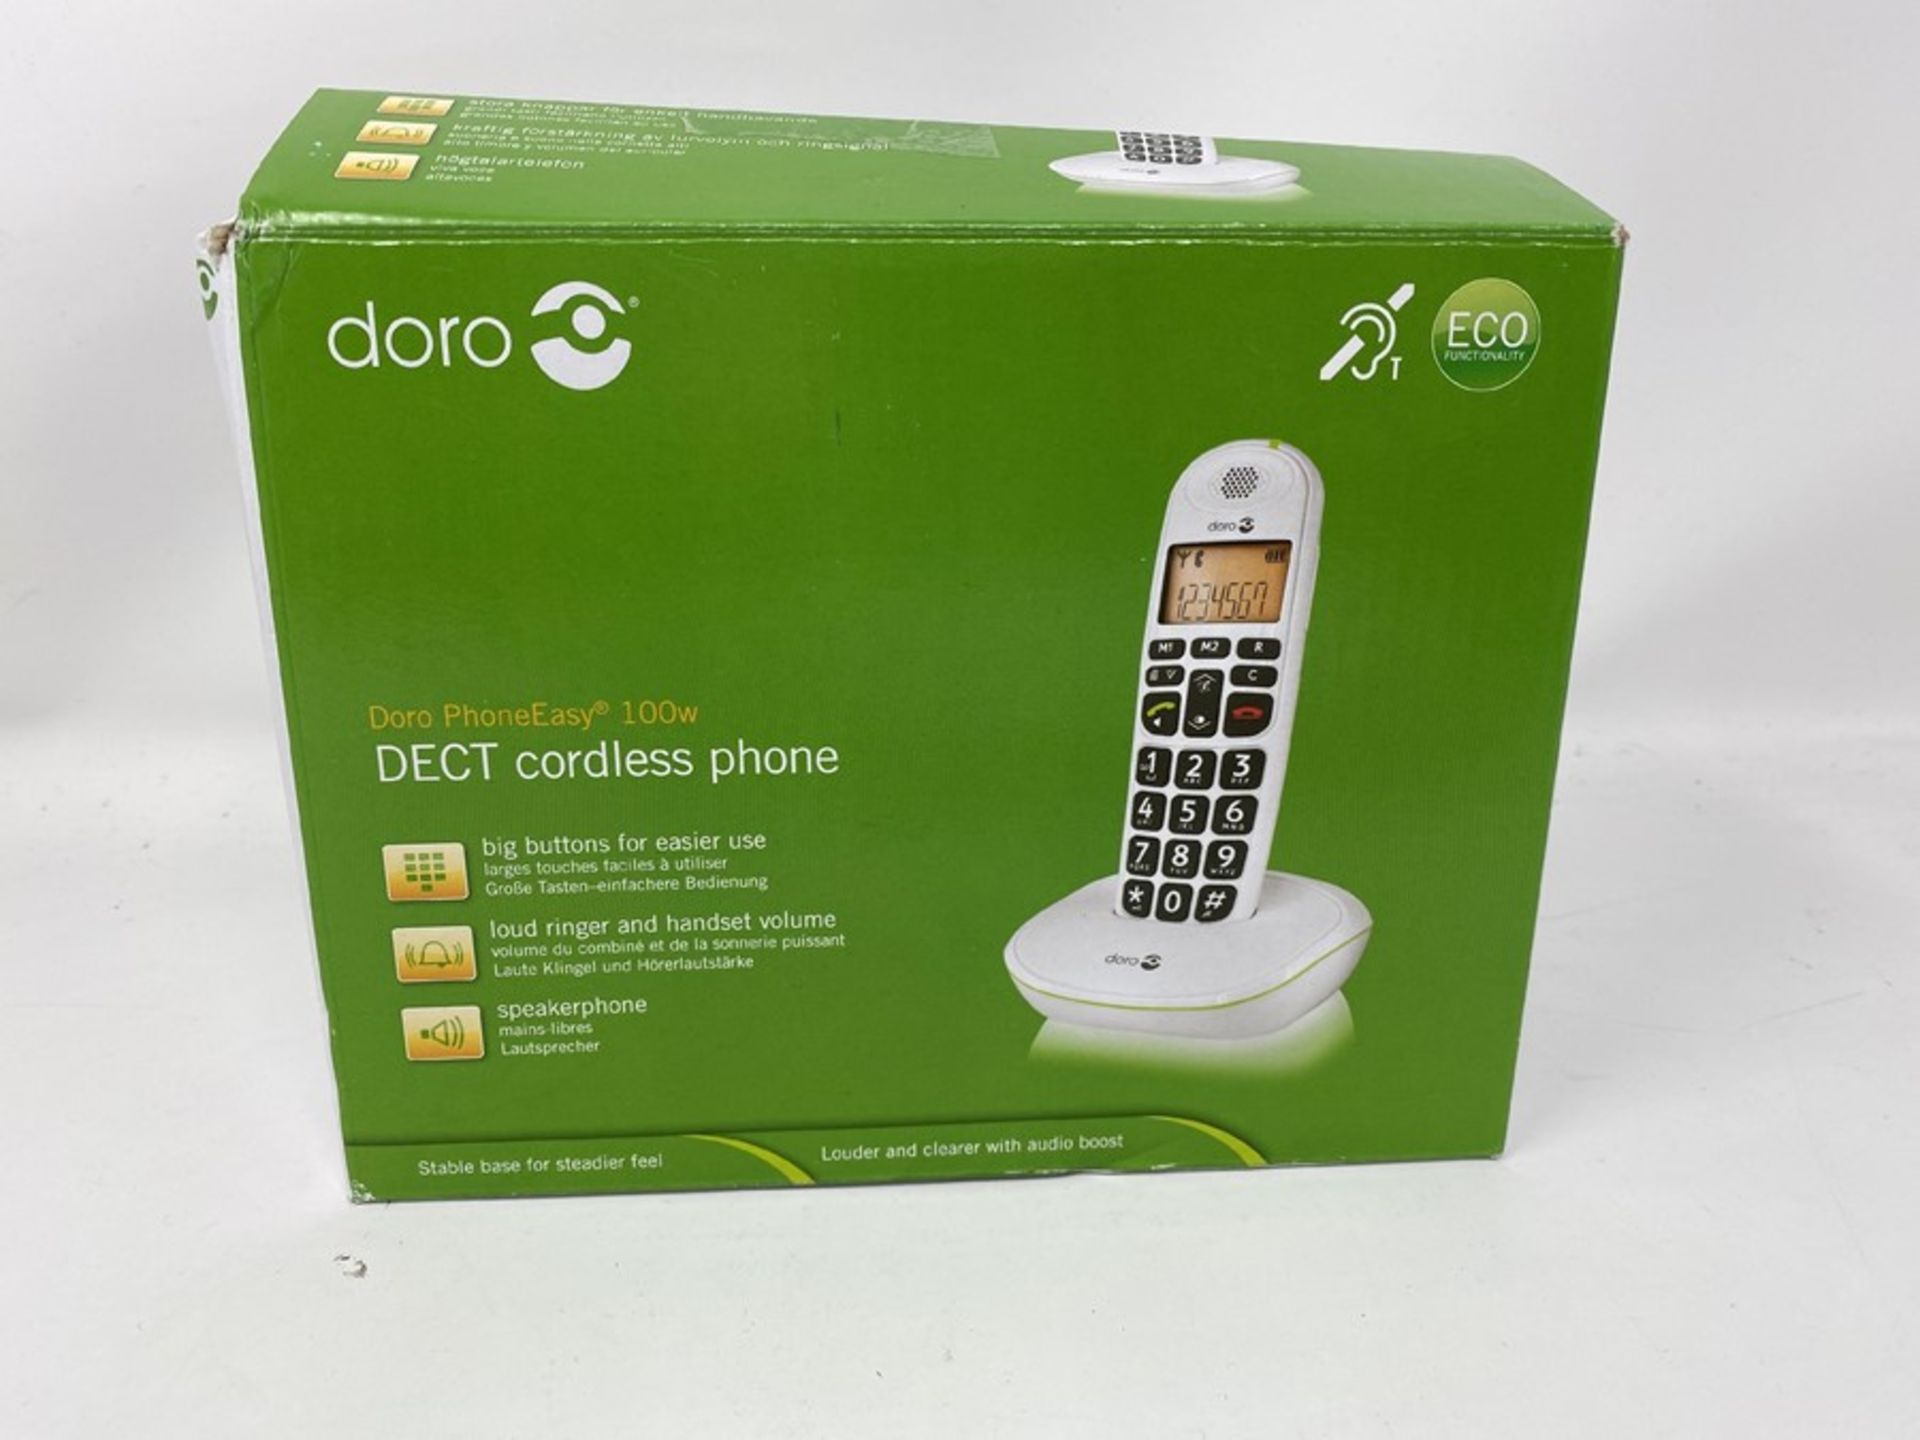 Doro PhoneEasy 100W DECT Cordless Phone with Amp - Image 2 of 2